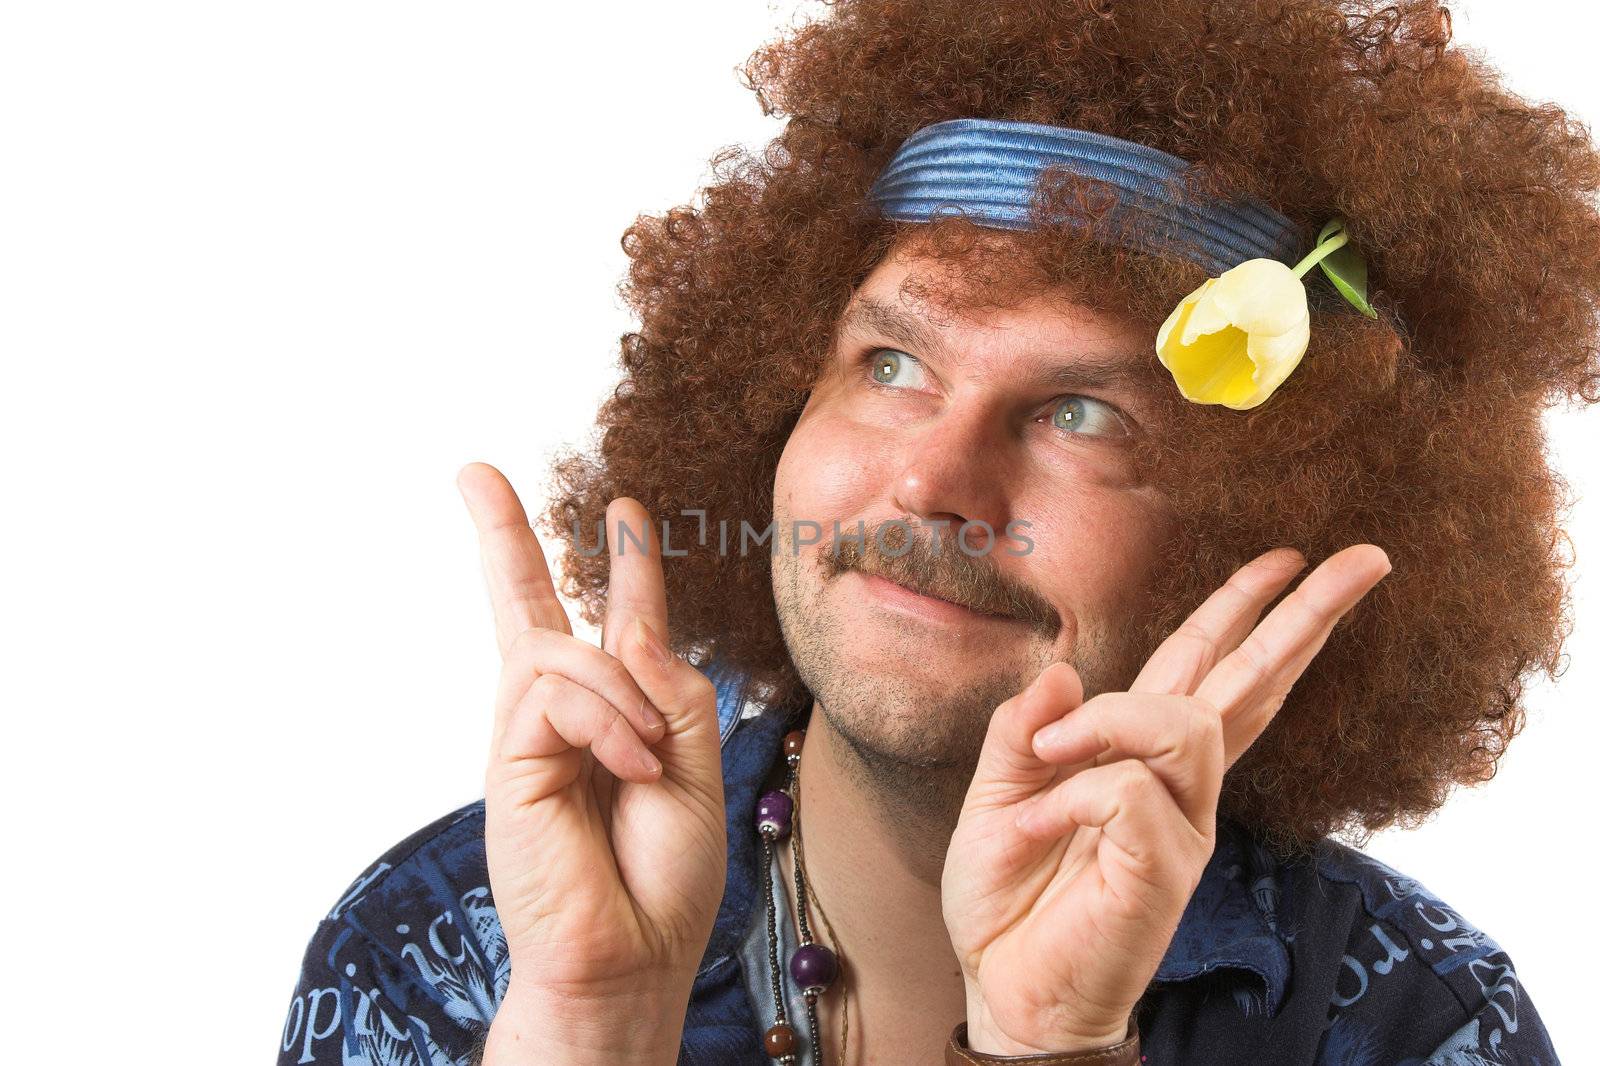 A slightly too old hippie making the peace sign with a tulip in his hair